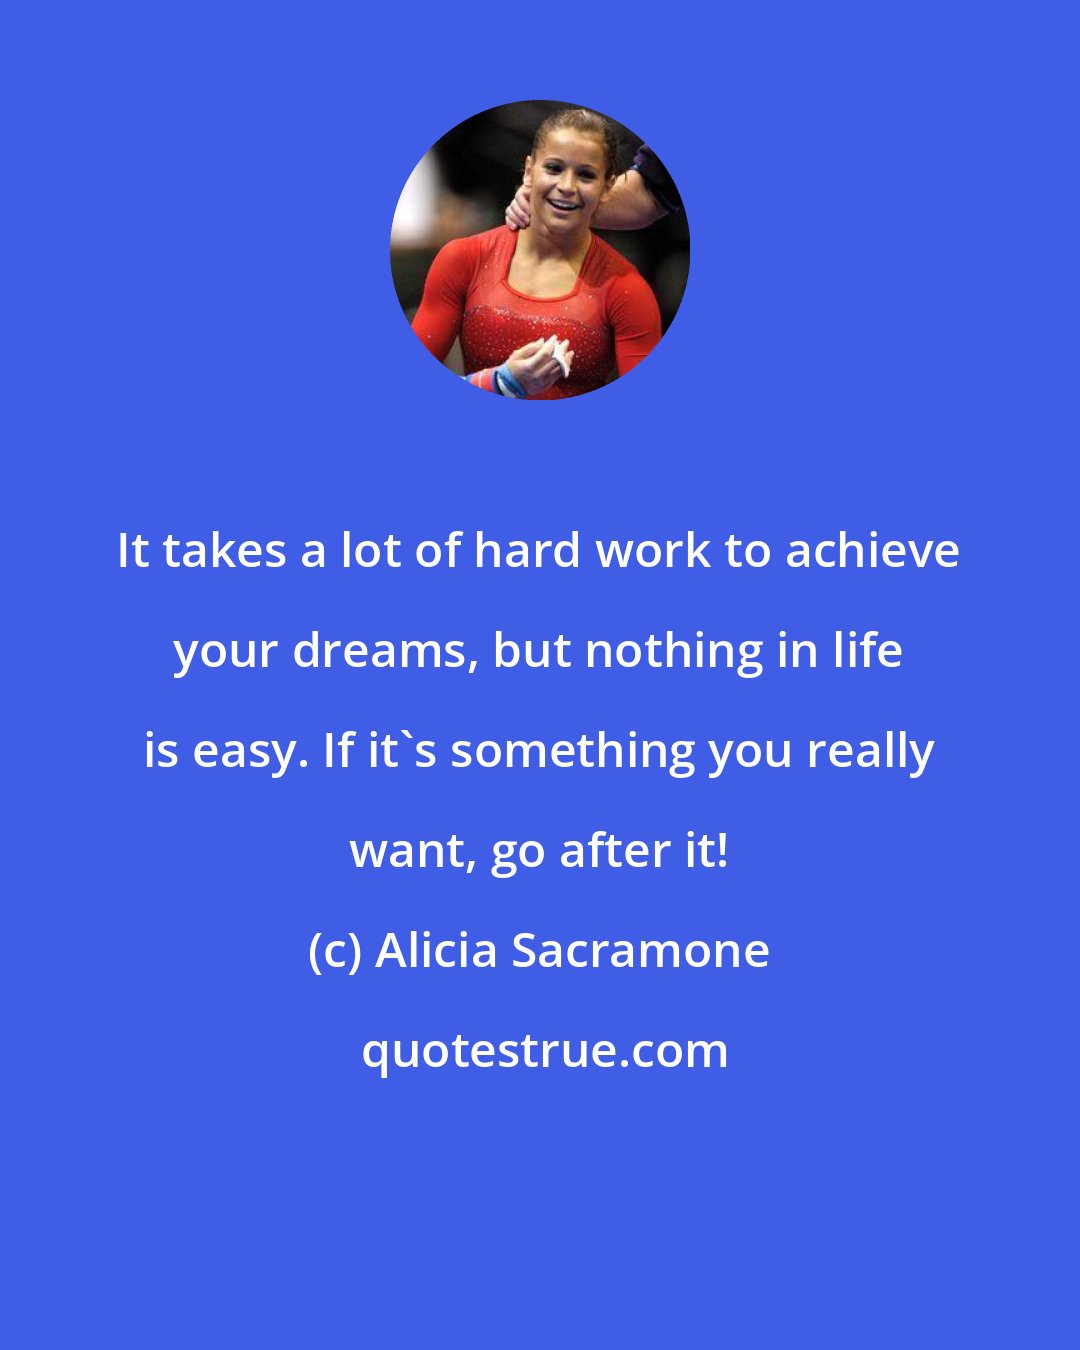 Alicia Sacramone: It takes a lot of hard work to achieve your dreams, but nothing in life is easy. If it's something you really want, go after it!